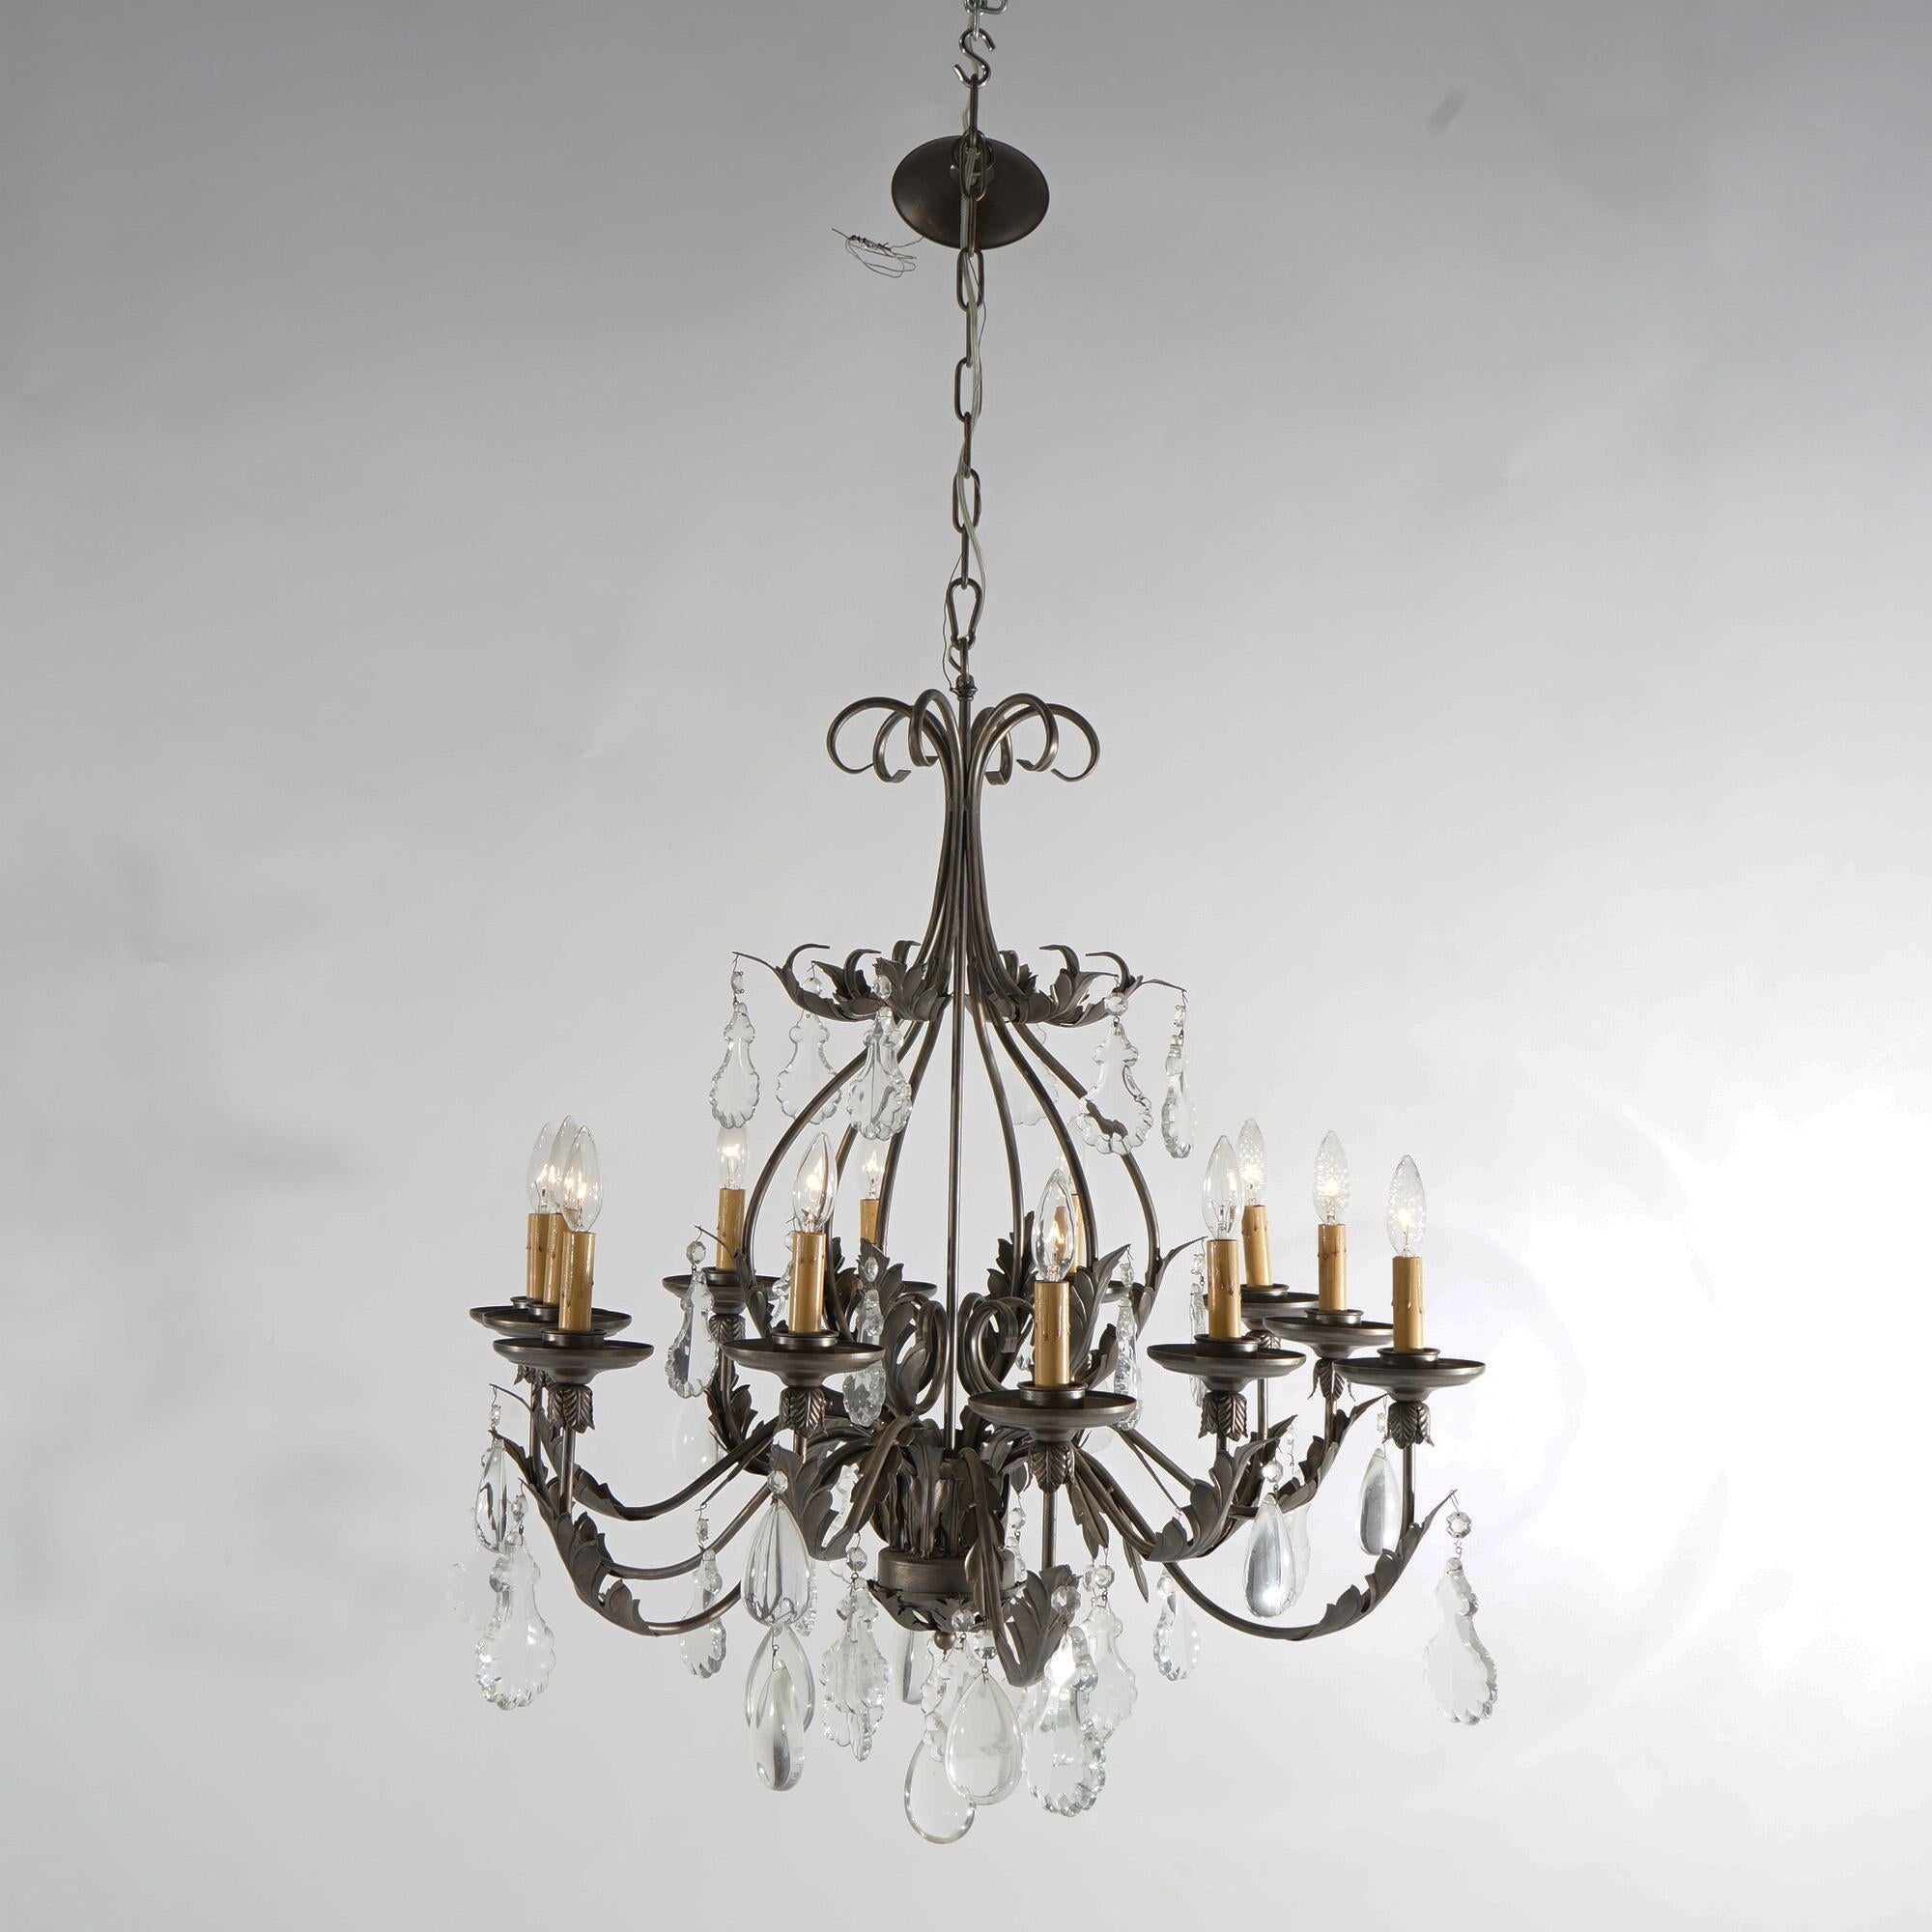 A French Louis XIV style chandelier offers gilt metal frame with scroll form arms terminating in candle lights; foliate elements and cut crystals throughout; 20th century

Measures - 51